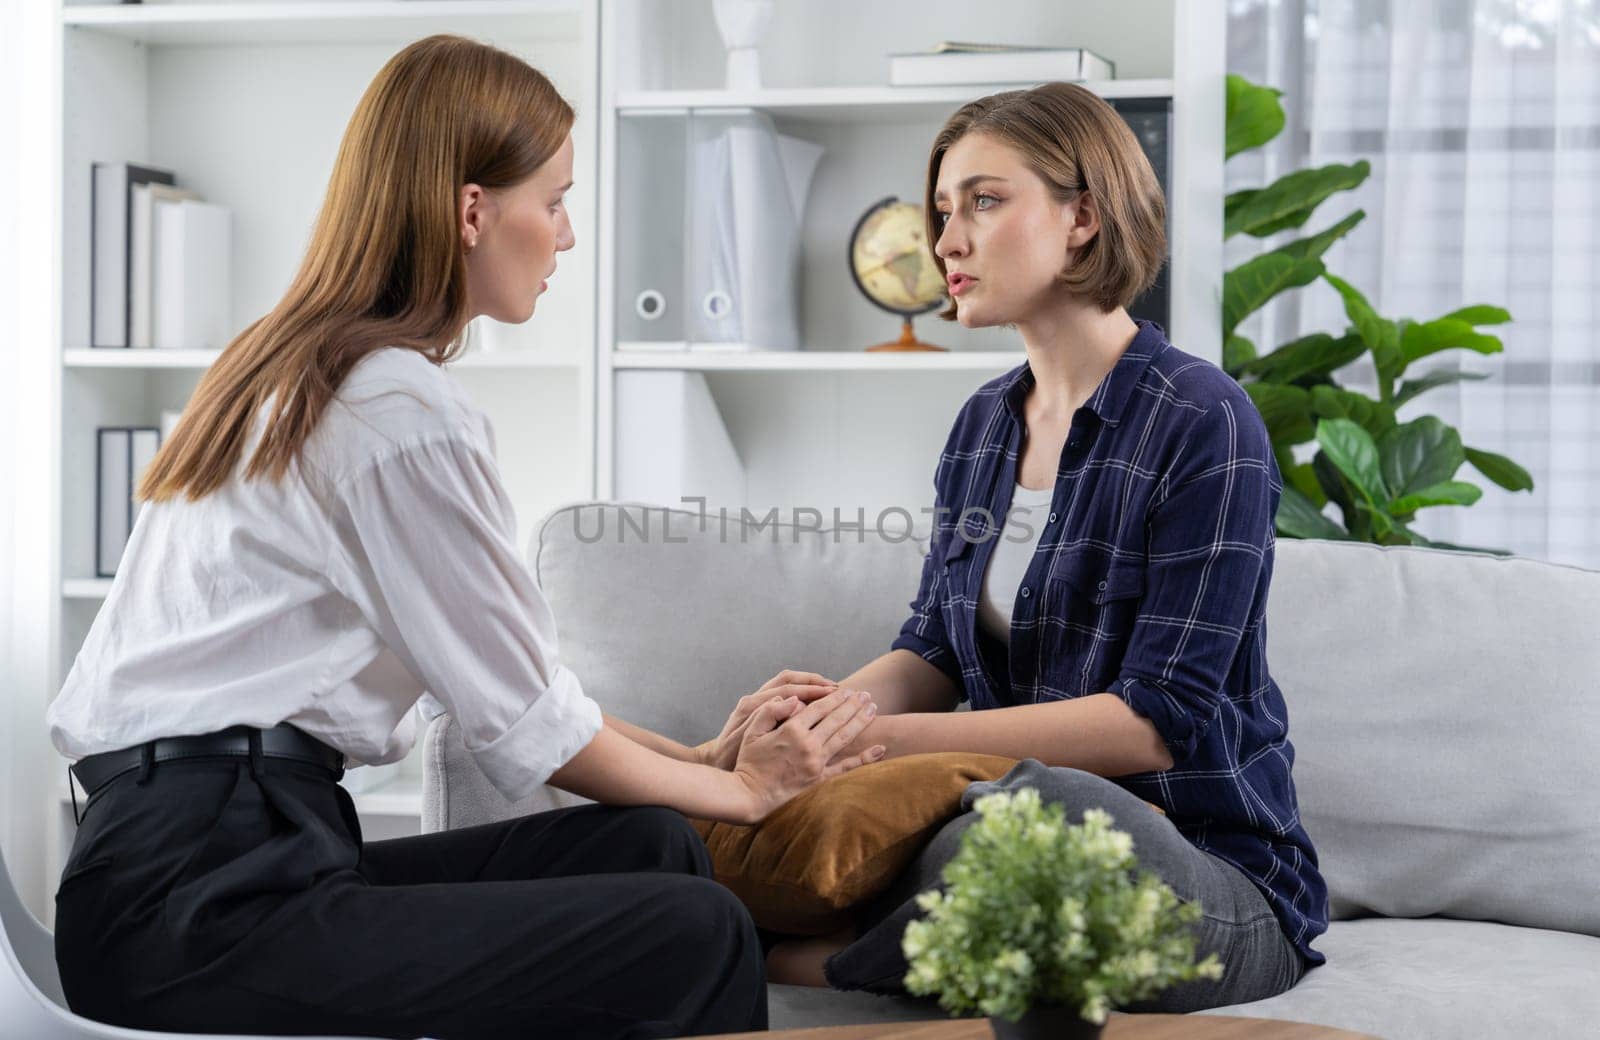 Sad PTSD woman patient in utmost therapy for mental health with psychologist by biancoblue